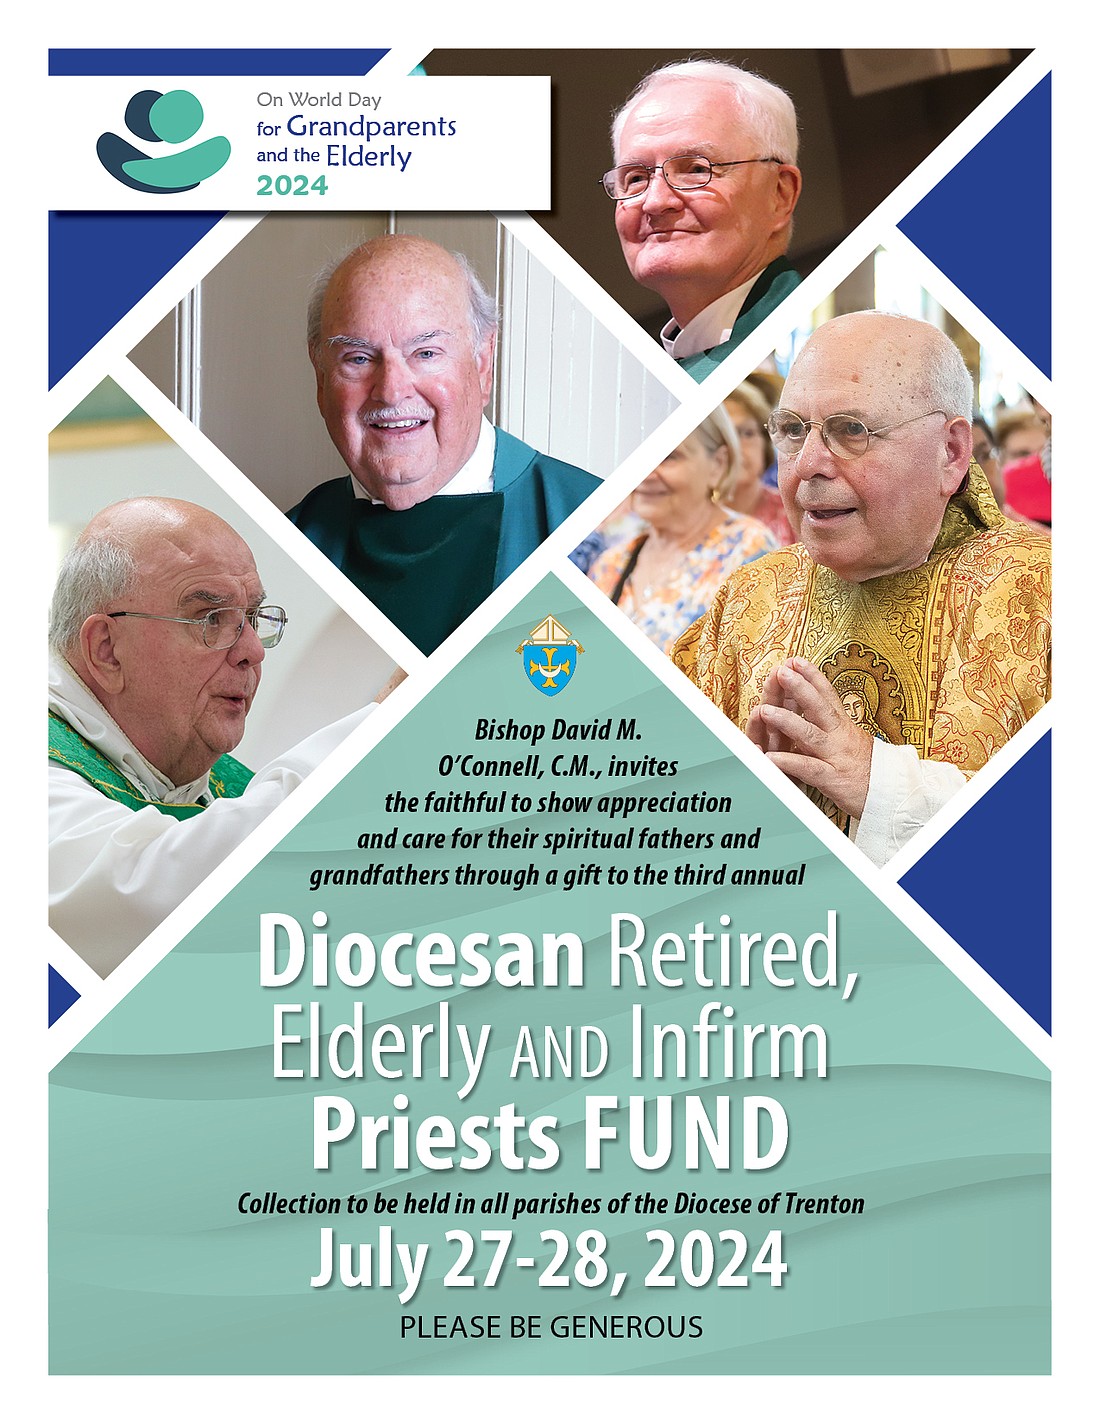 This promotional poster features, from left, Father Daniel Hesko, retired pastor of St. Catharine Laboure Parish, Middletown; Father Jerome Nolan, retired from Ascension Church, Bradley Beach, now part of St. Teresa of Calcutta Parish, Bradley Beach; and Father Pasquale Papalia, retired from St. Elizabeth Ann Seton Parish, Whiting.